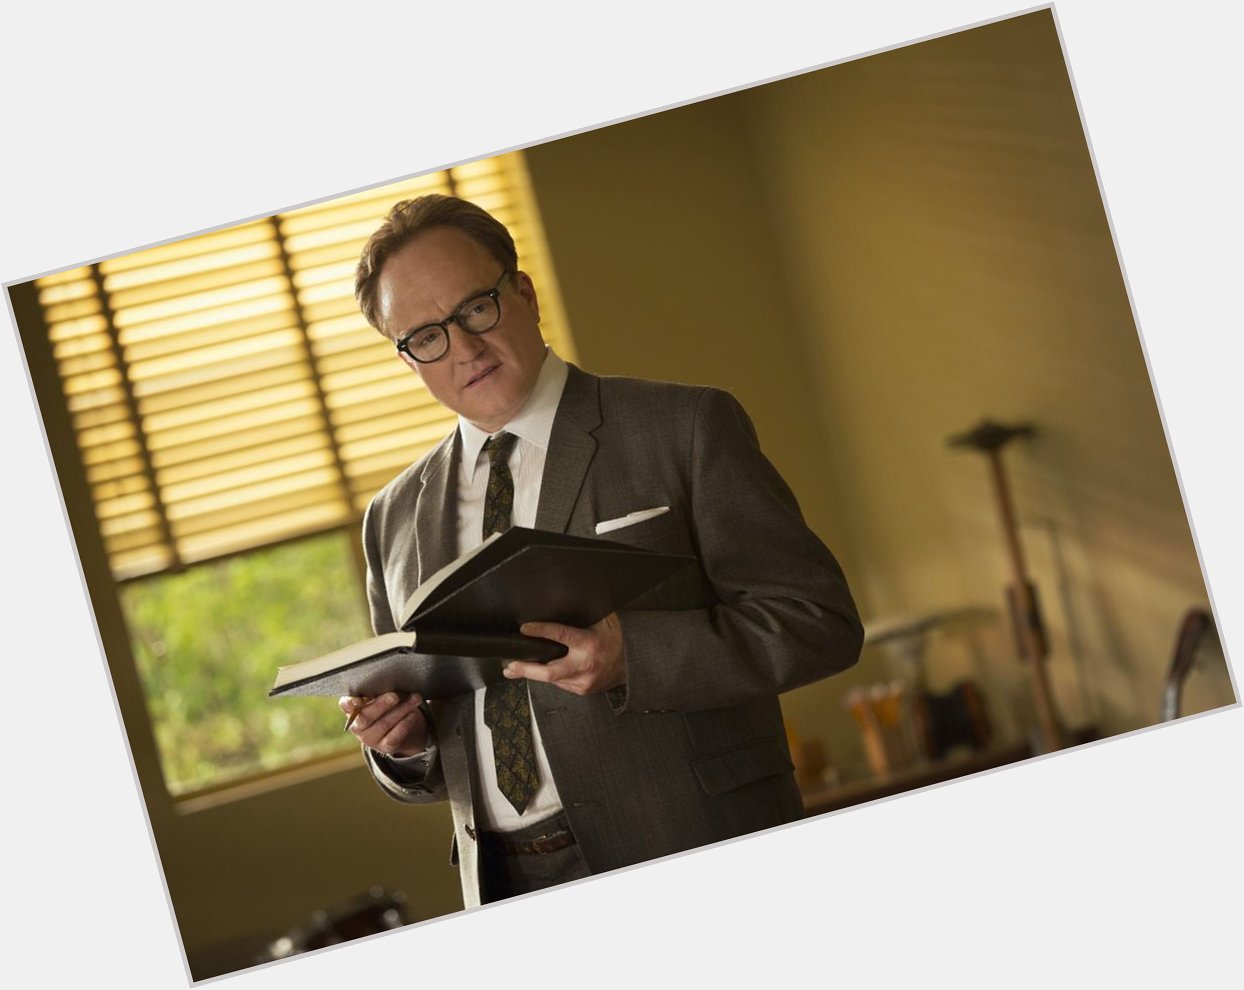 Happy birthday Bradley Whitford, so great as one of the lovable characters in Saving Mr. Banks. 